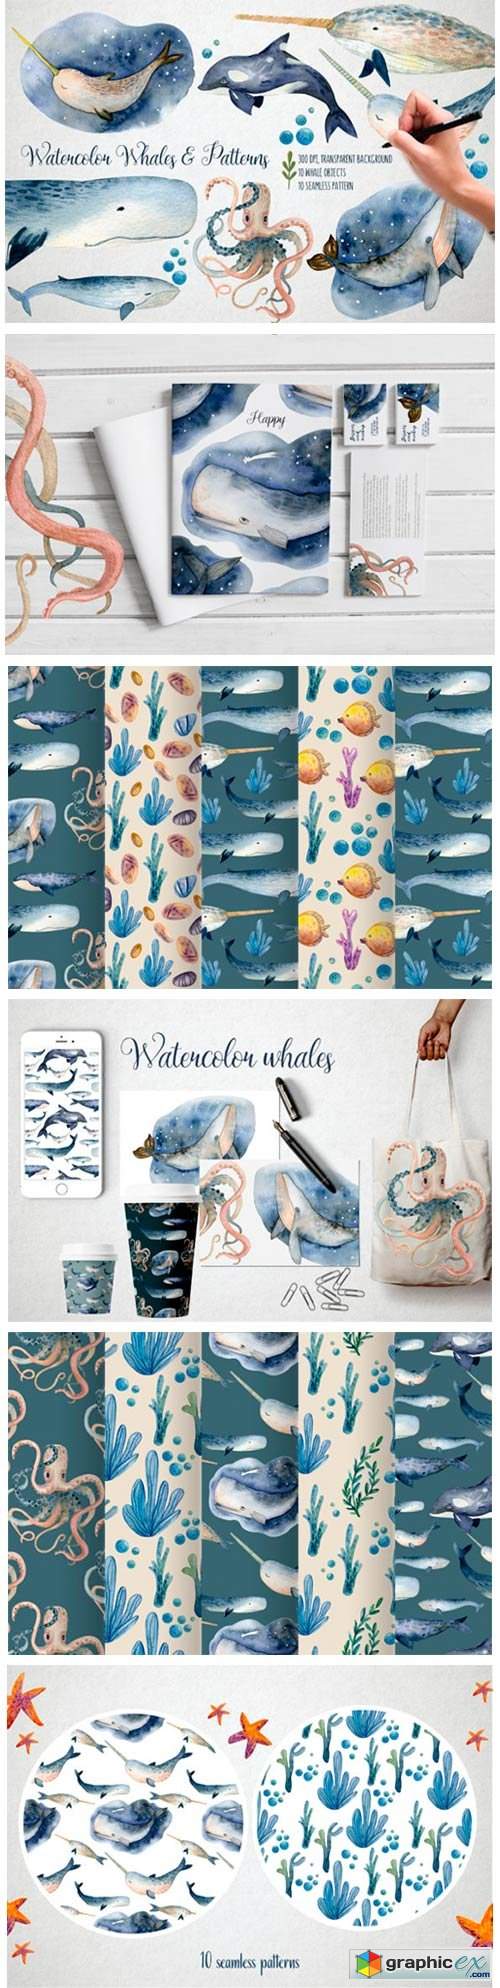  Watercolor Whales & Patterns 